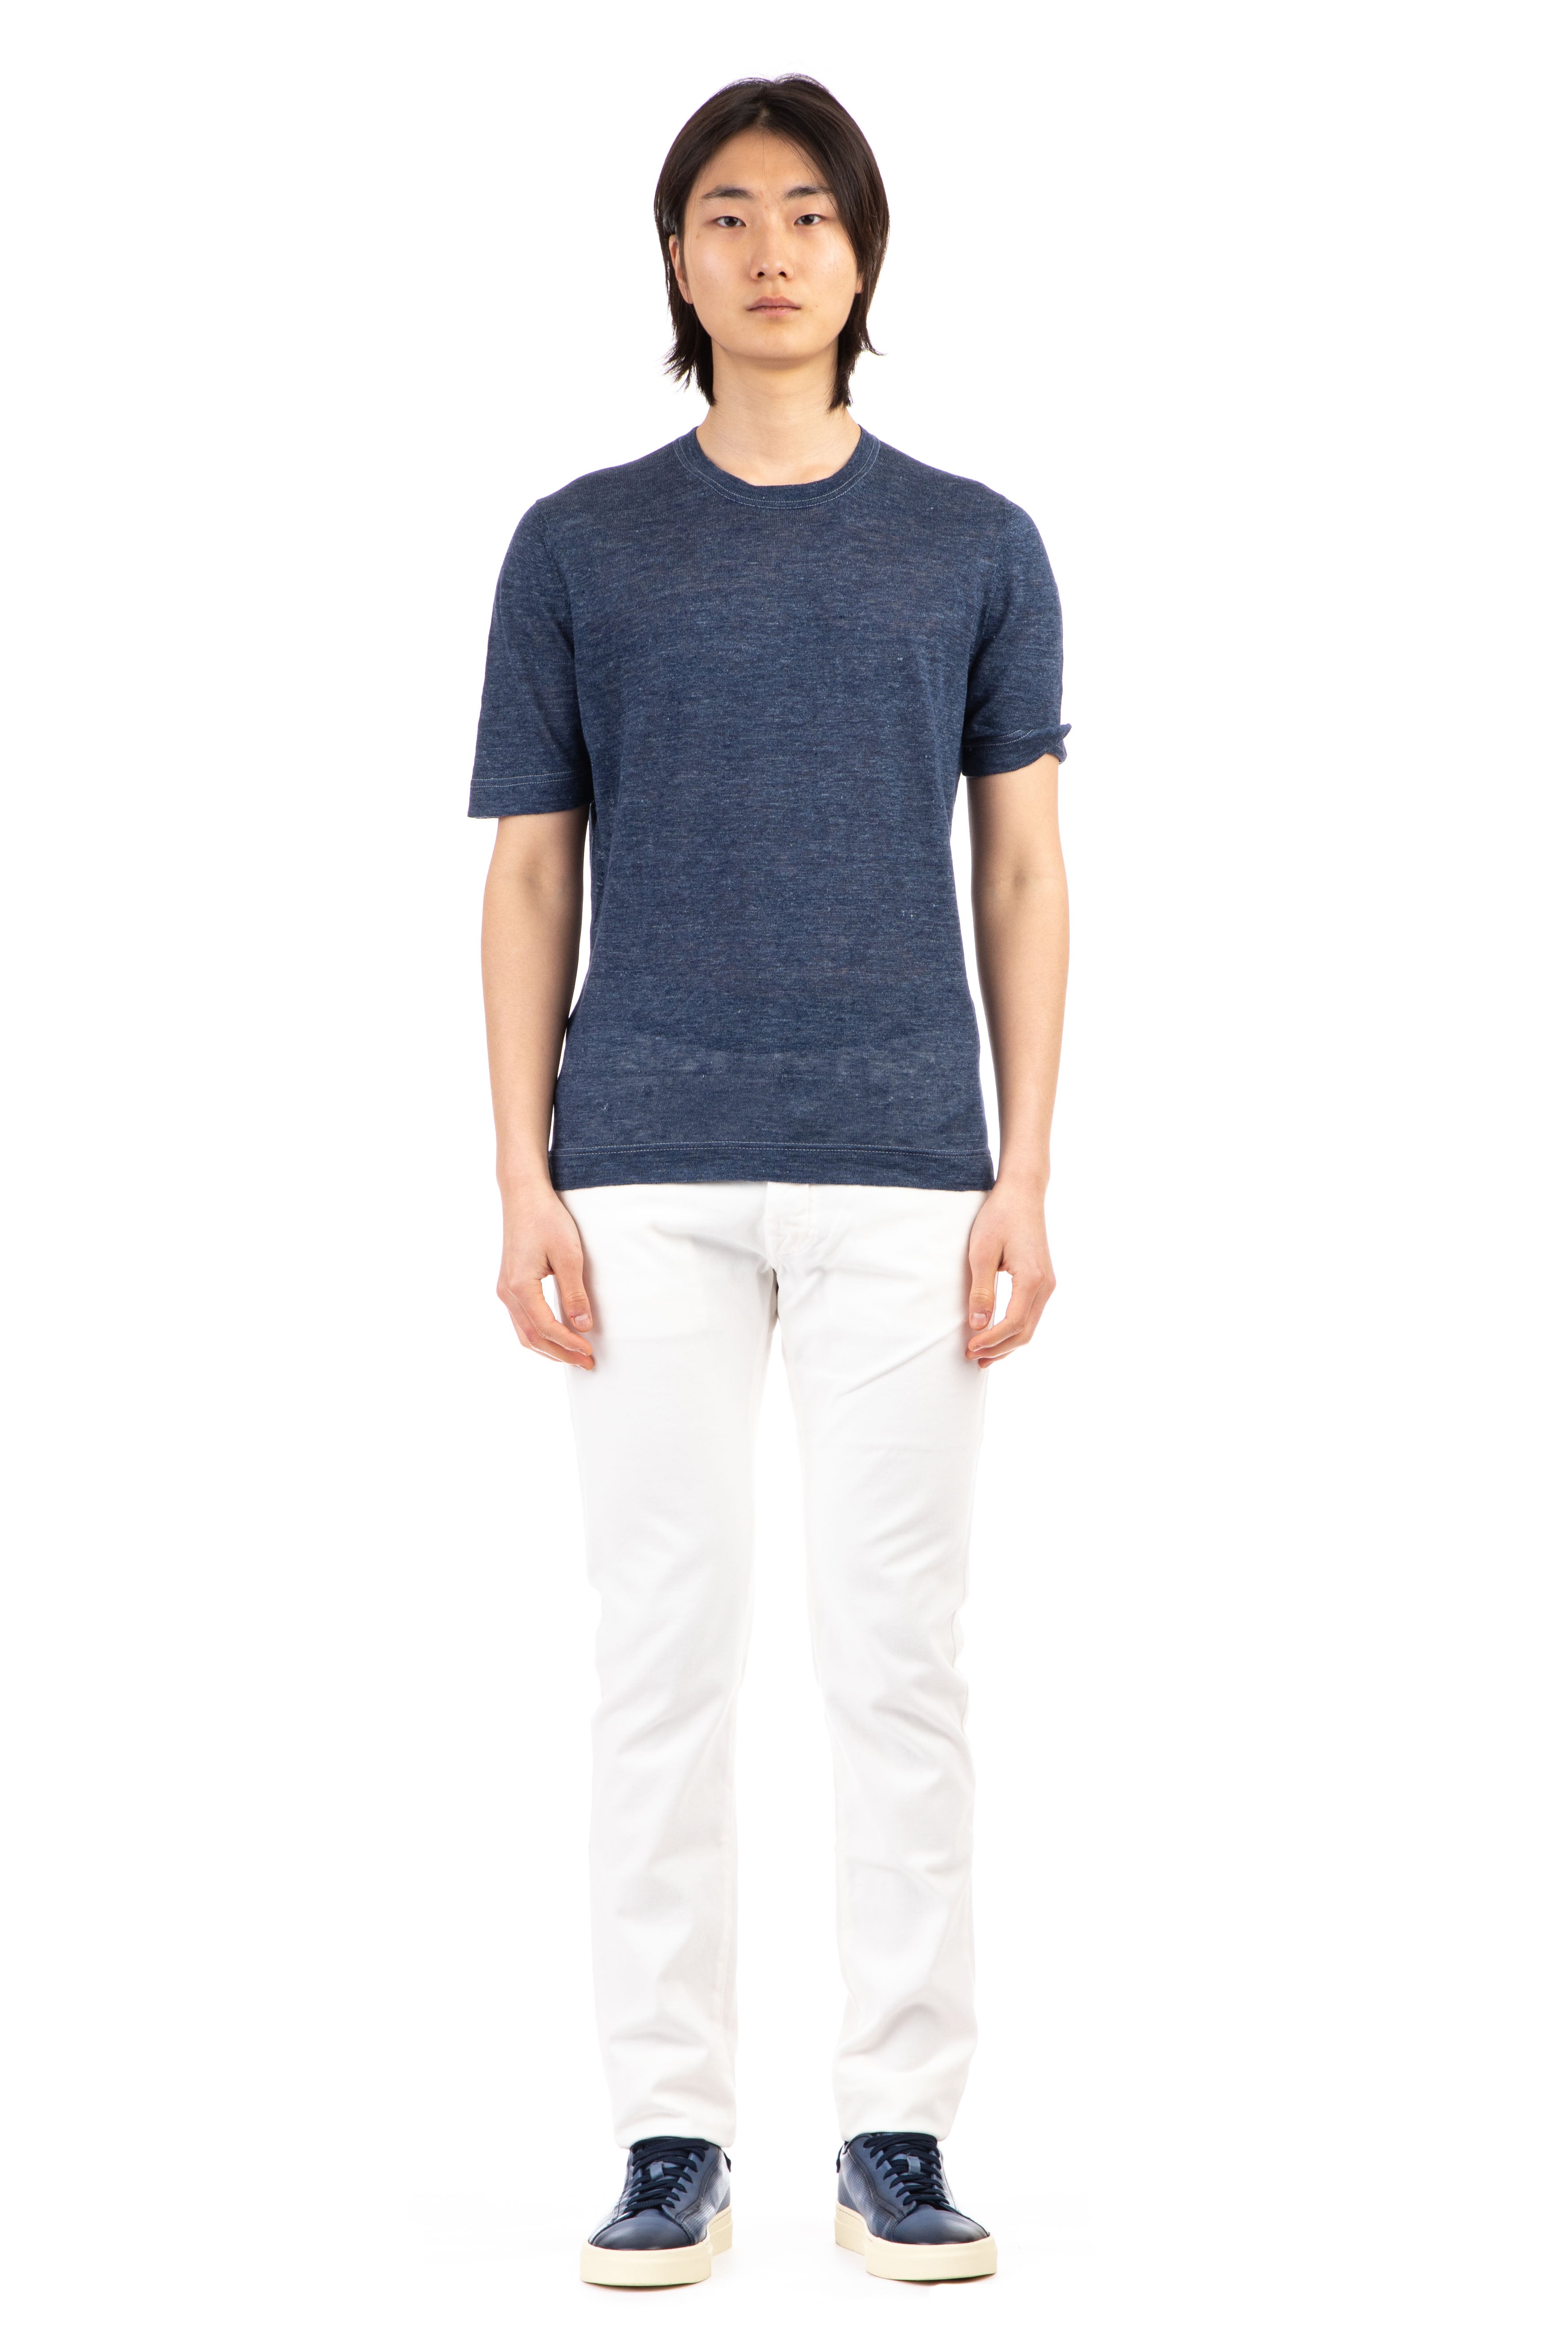 Linen T-shirt with double stitching collar